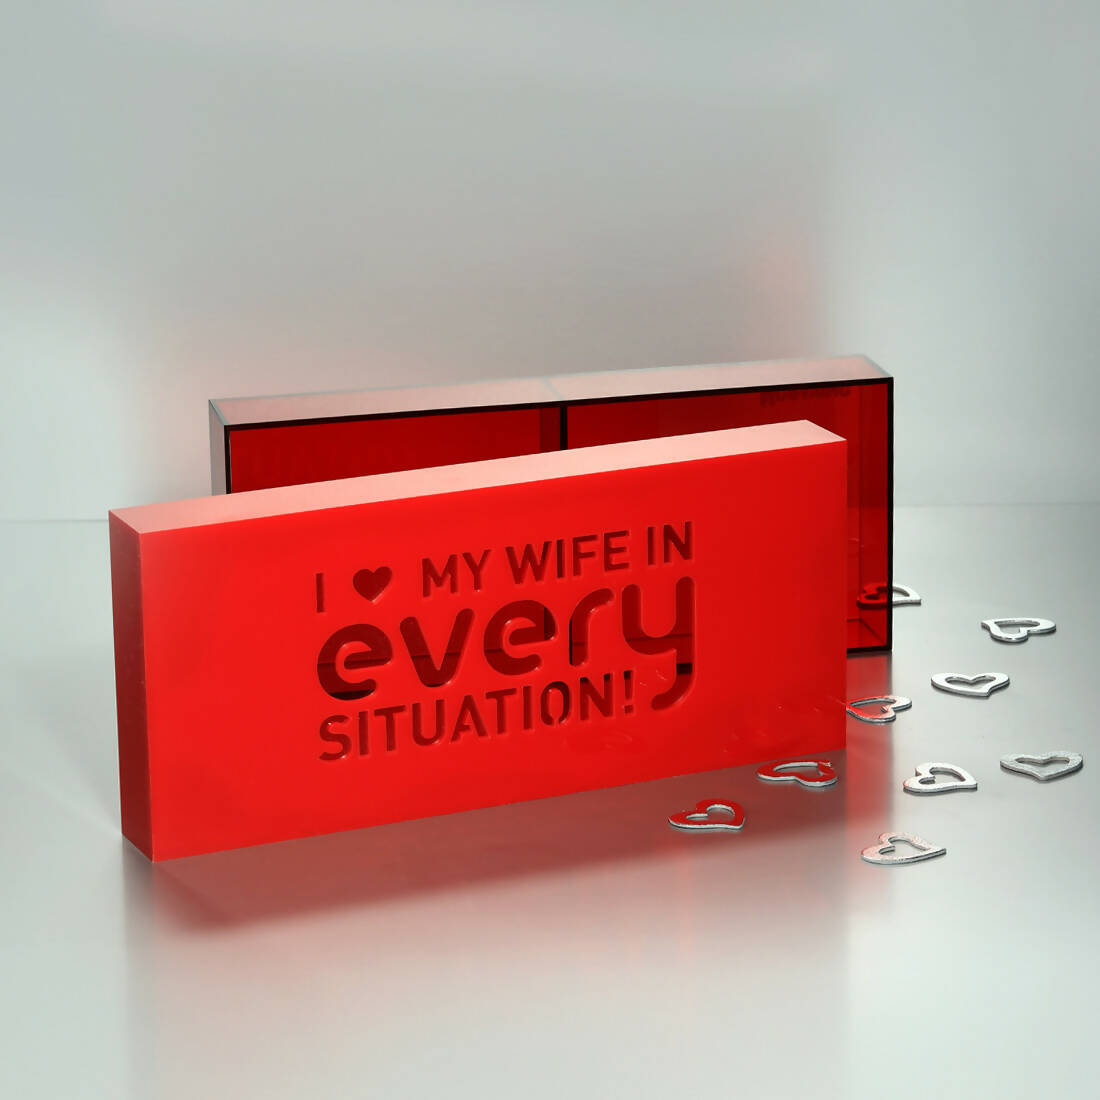 Custom-made wife box design. CHOCOLATE NOT INCLUDED.